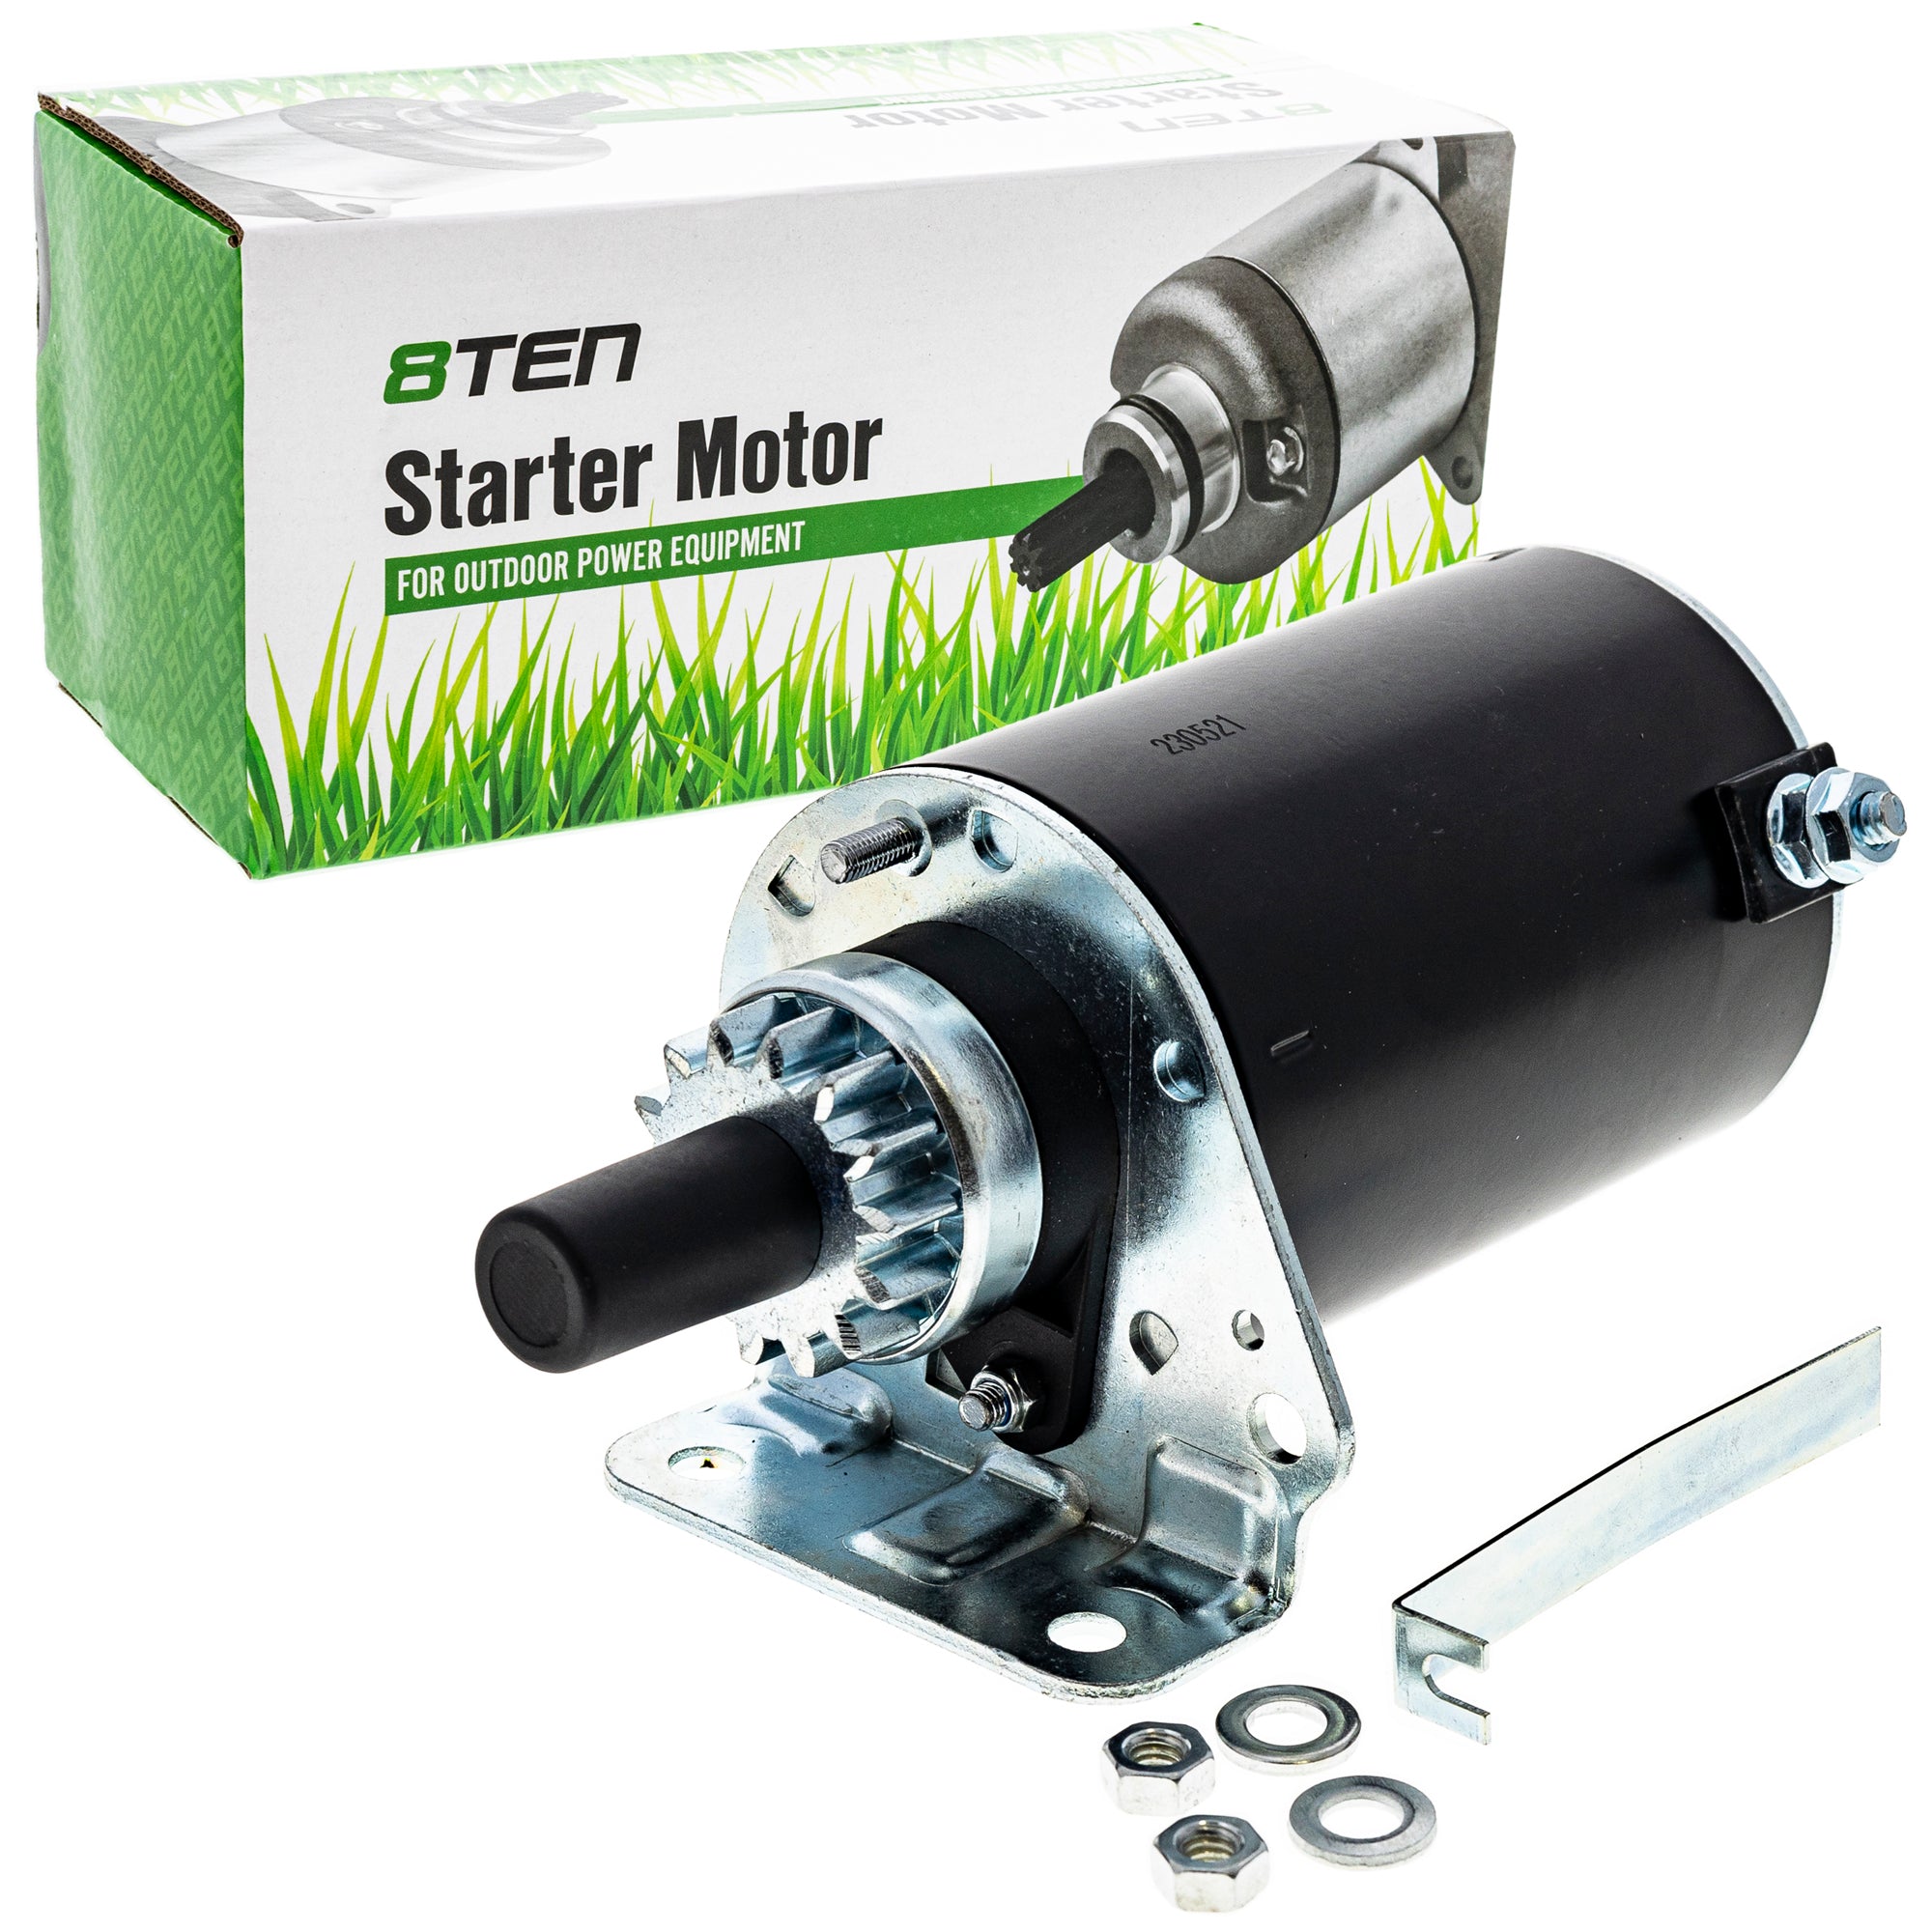 Starter Motor Assembly for zOTHER Briggs and Stratton Briggs & Stratton 8TEN 810-CSM2416O